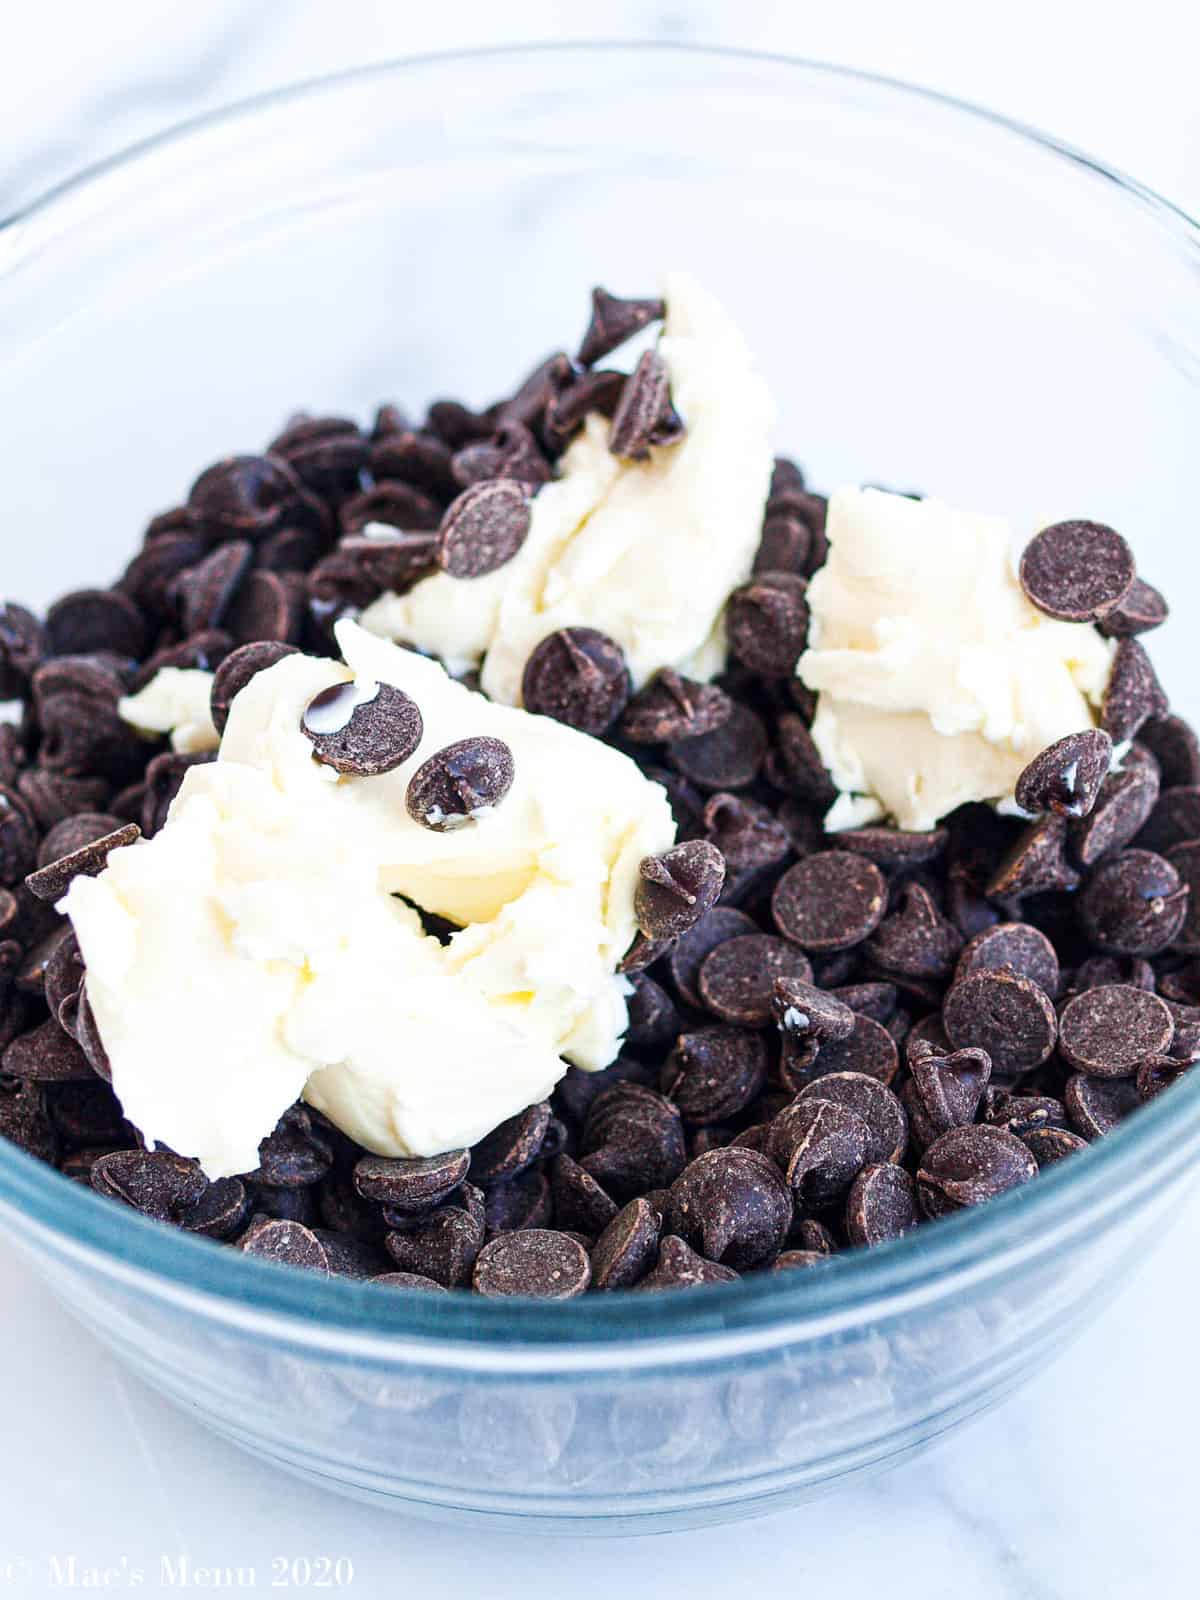 A mixing bowl with chocolate chips and butter